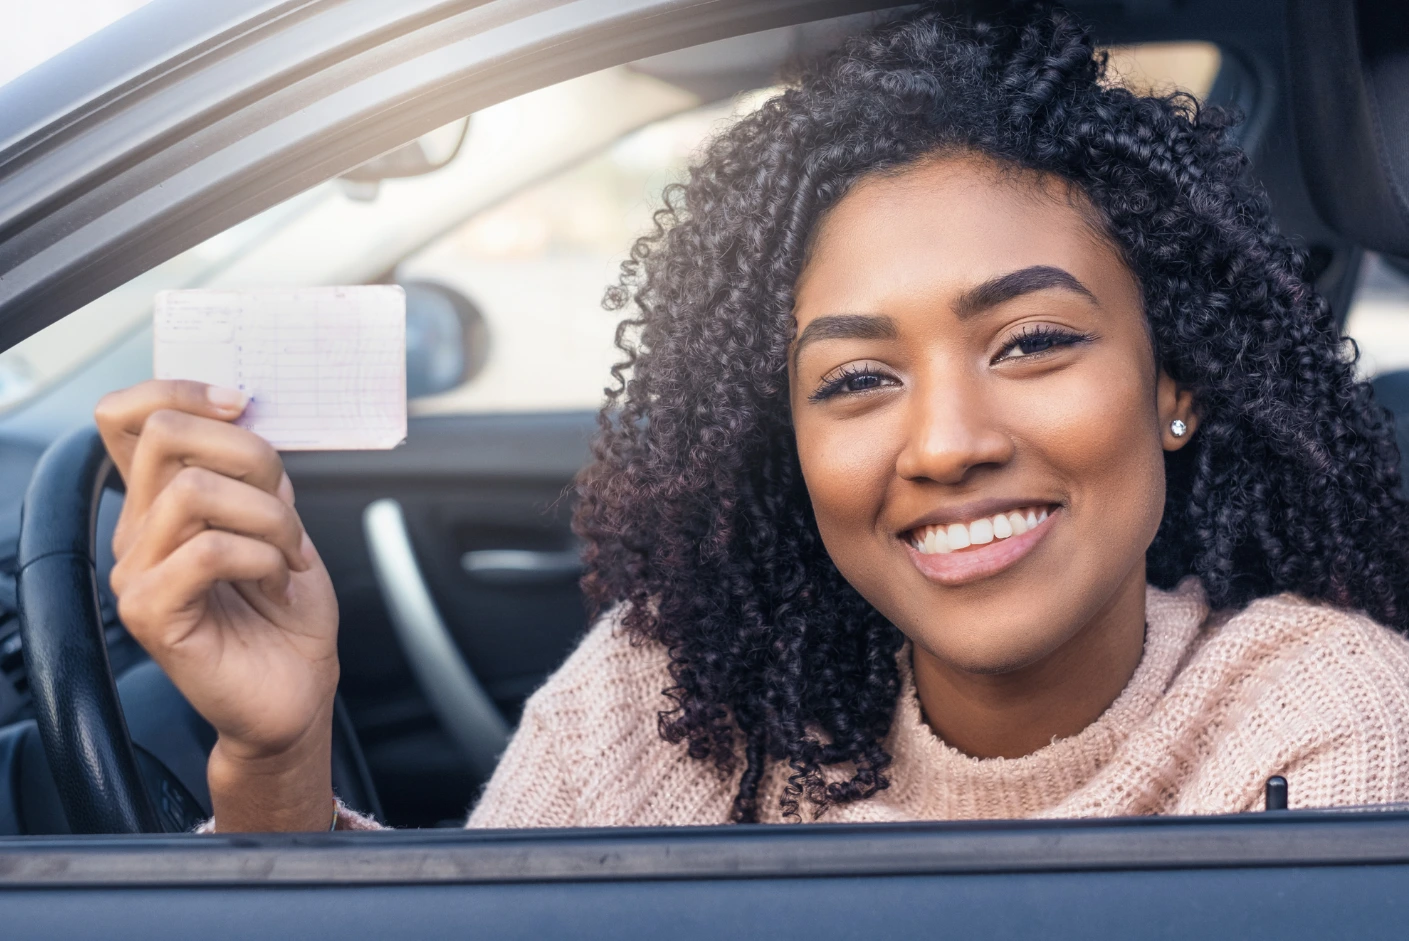 Here is the best guide for Texas drivers license driving test in USA